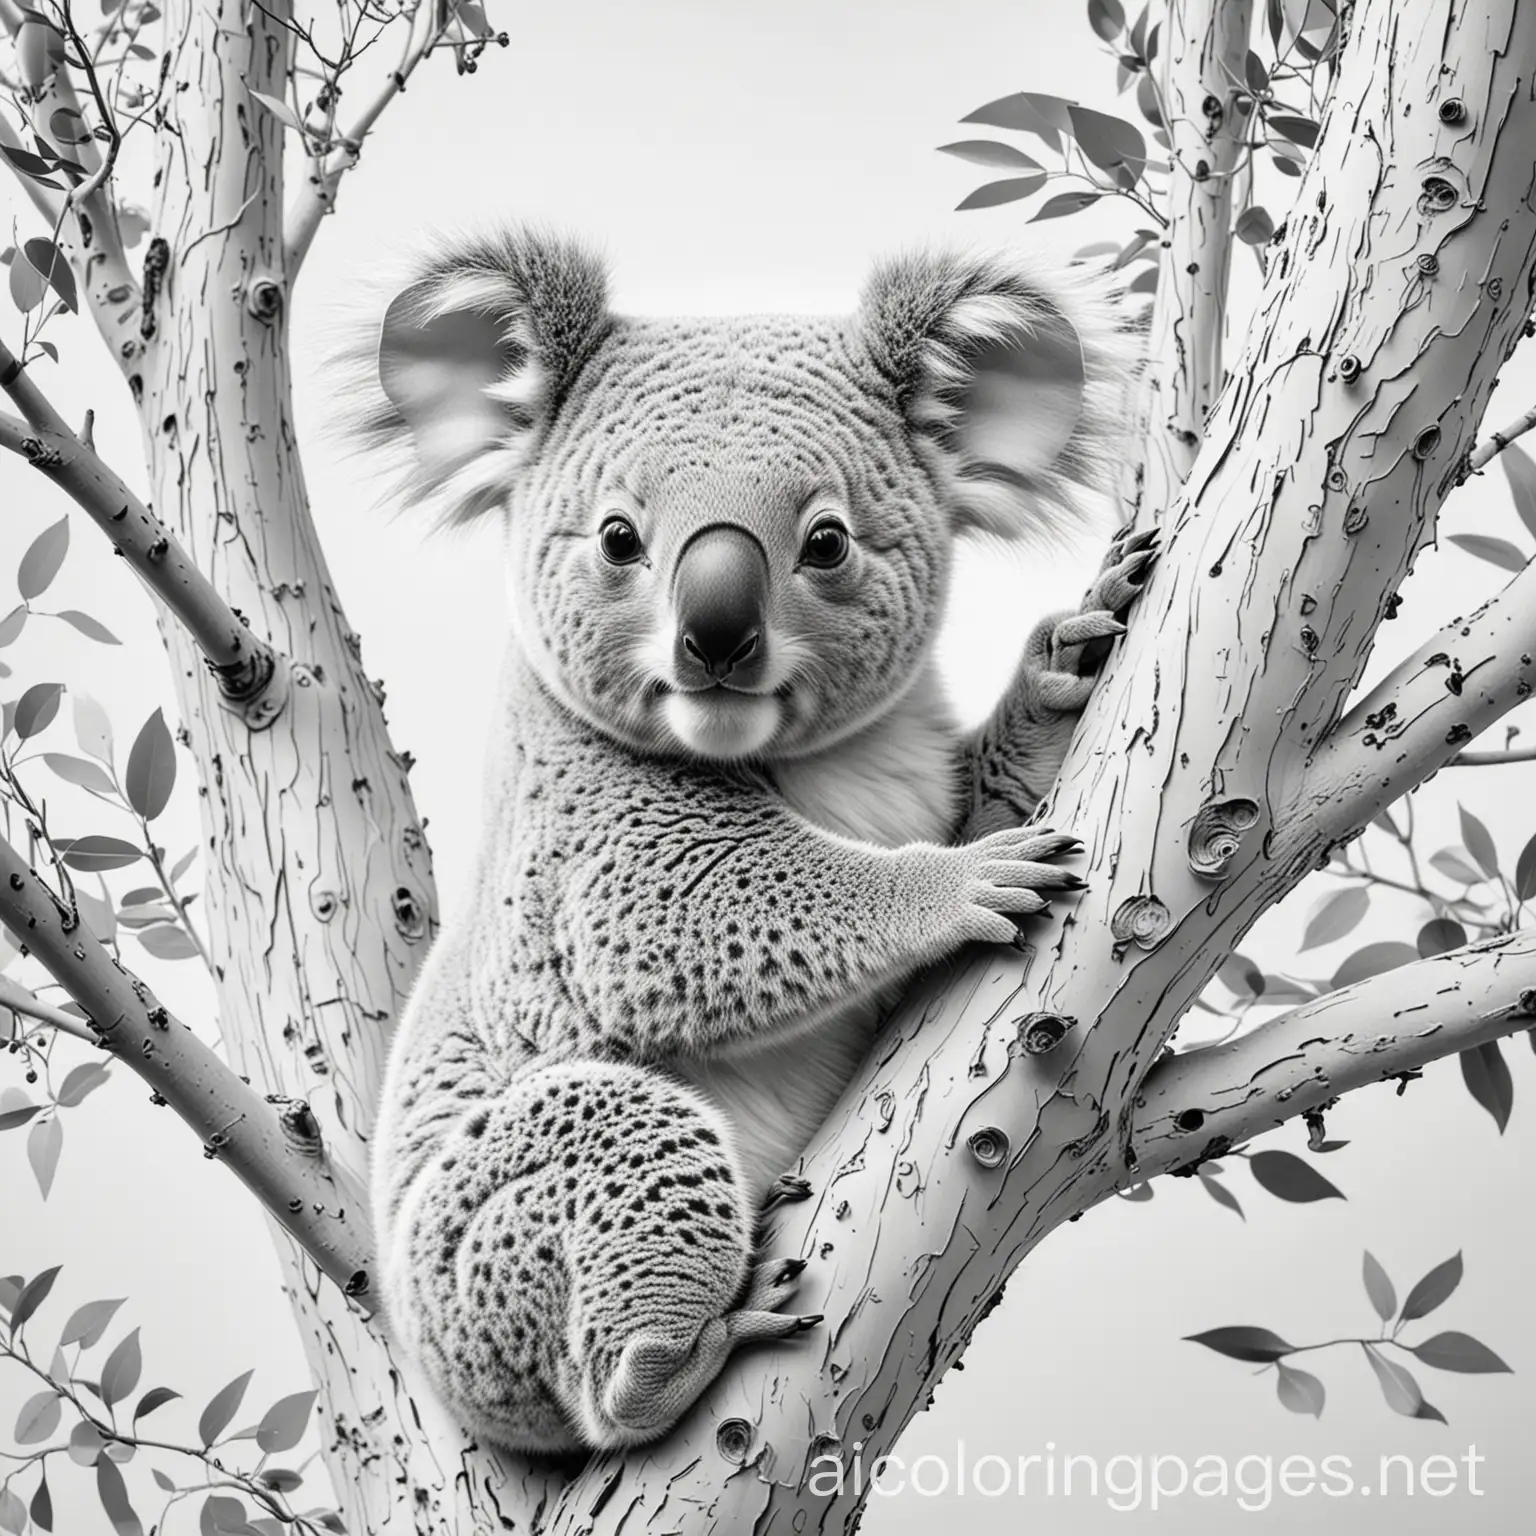 A koala with leopard spots climbing a eucalyptus tree. Thick line, Colouring Page, black and white, line art, white background, Simplicity, Ample White Space. The background of the colouring page is plain white to make it easy for young children to colour within the lines. The outlines of all the subjects are easy to distinguish, making it simple for kids to colour without too much difficulty ,, Coloring Page, black and white, line art, white background, Simplicity, Ample White Space. The background of the coloring page is plain white to make it easy for young children to color within the lines. The outlines of all the subjects are easy to distinguish, making it simple for kids to color without too much difficulty